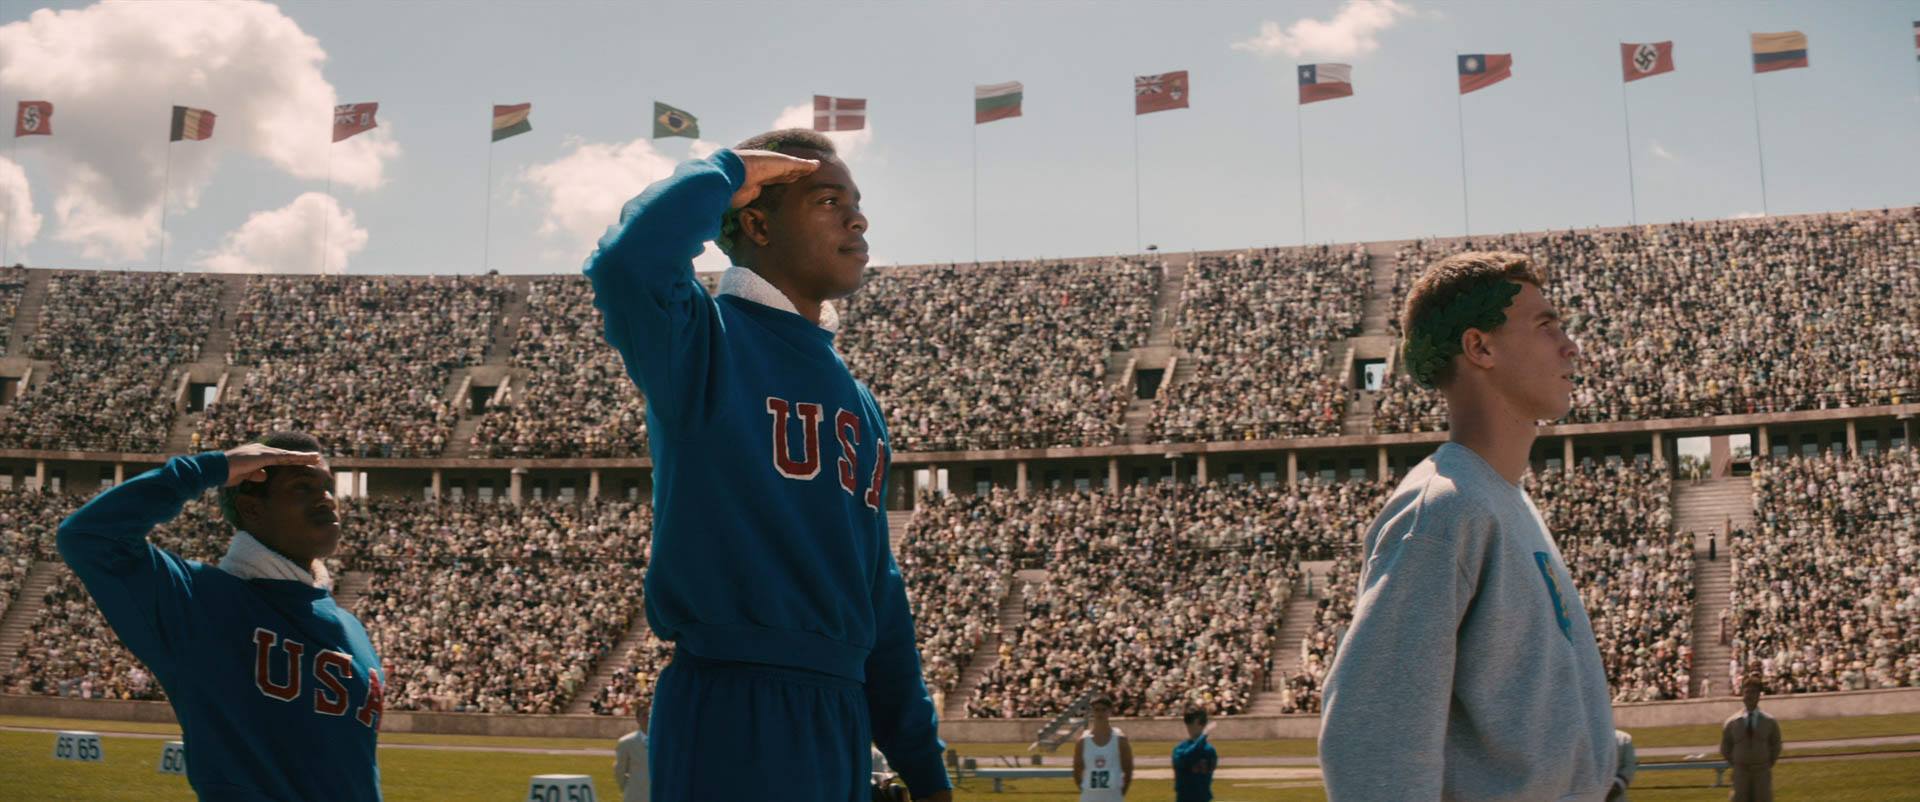 facebook.com“Race,” a film that documents the story of Jesse Owens, achieves new docu-drama heights.